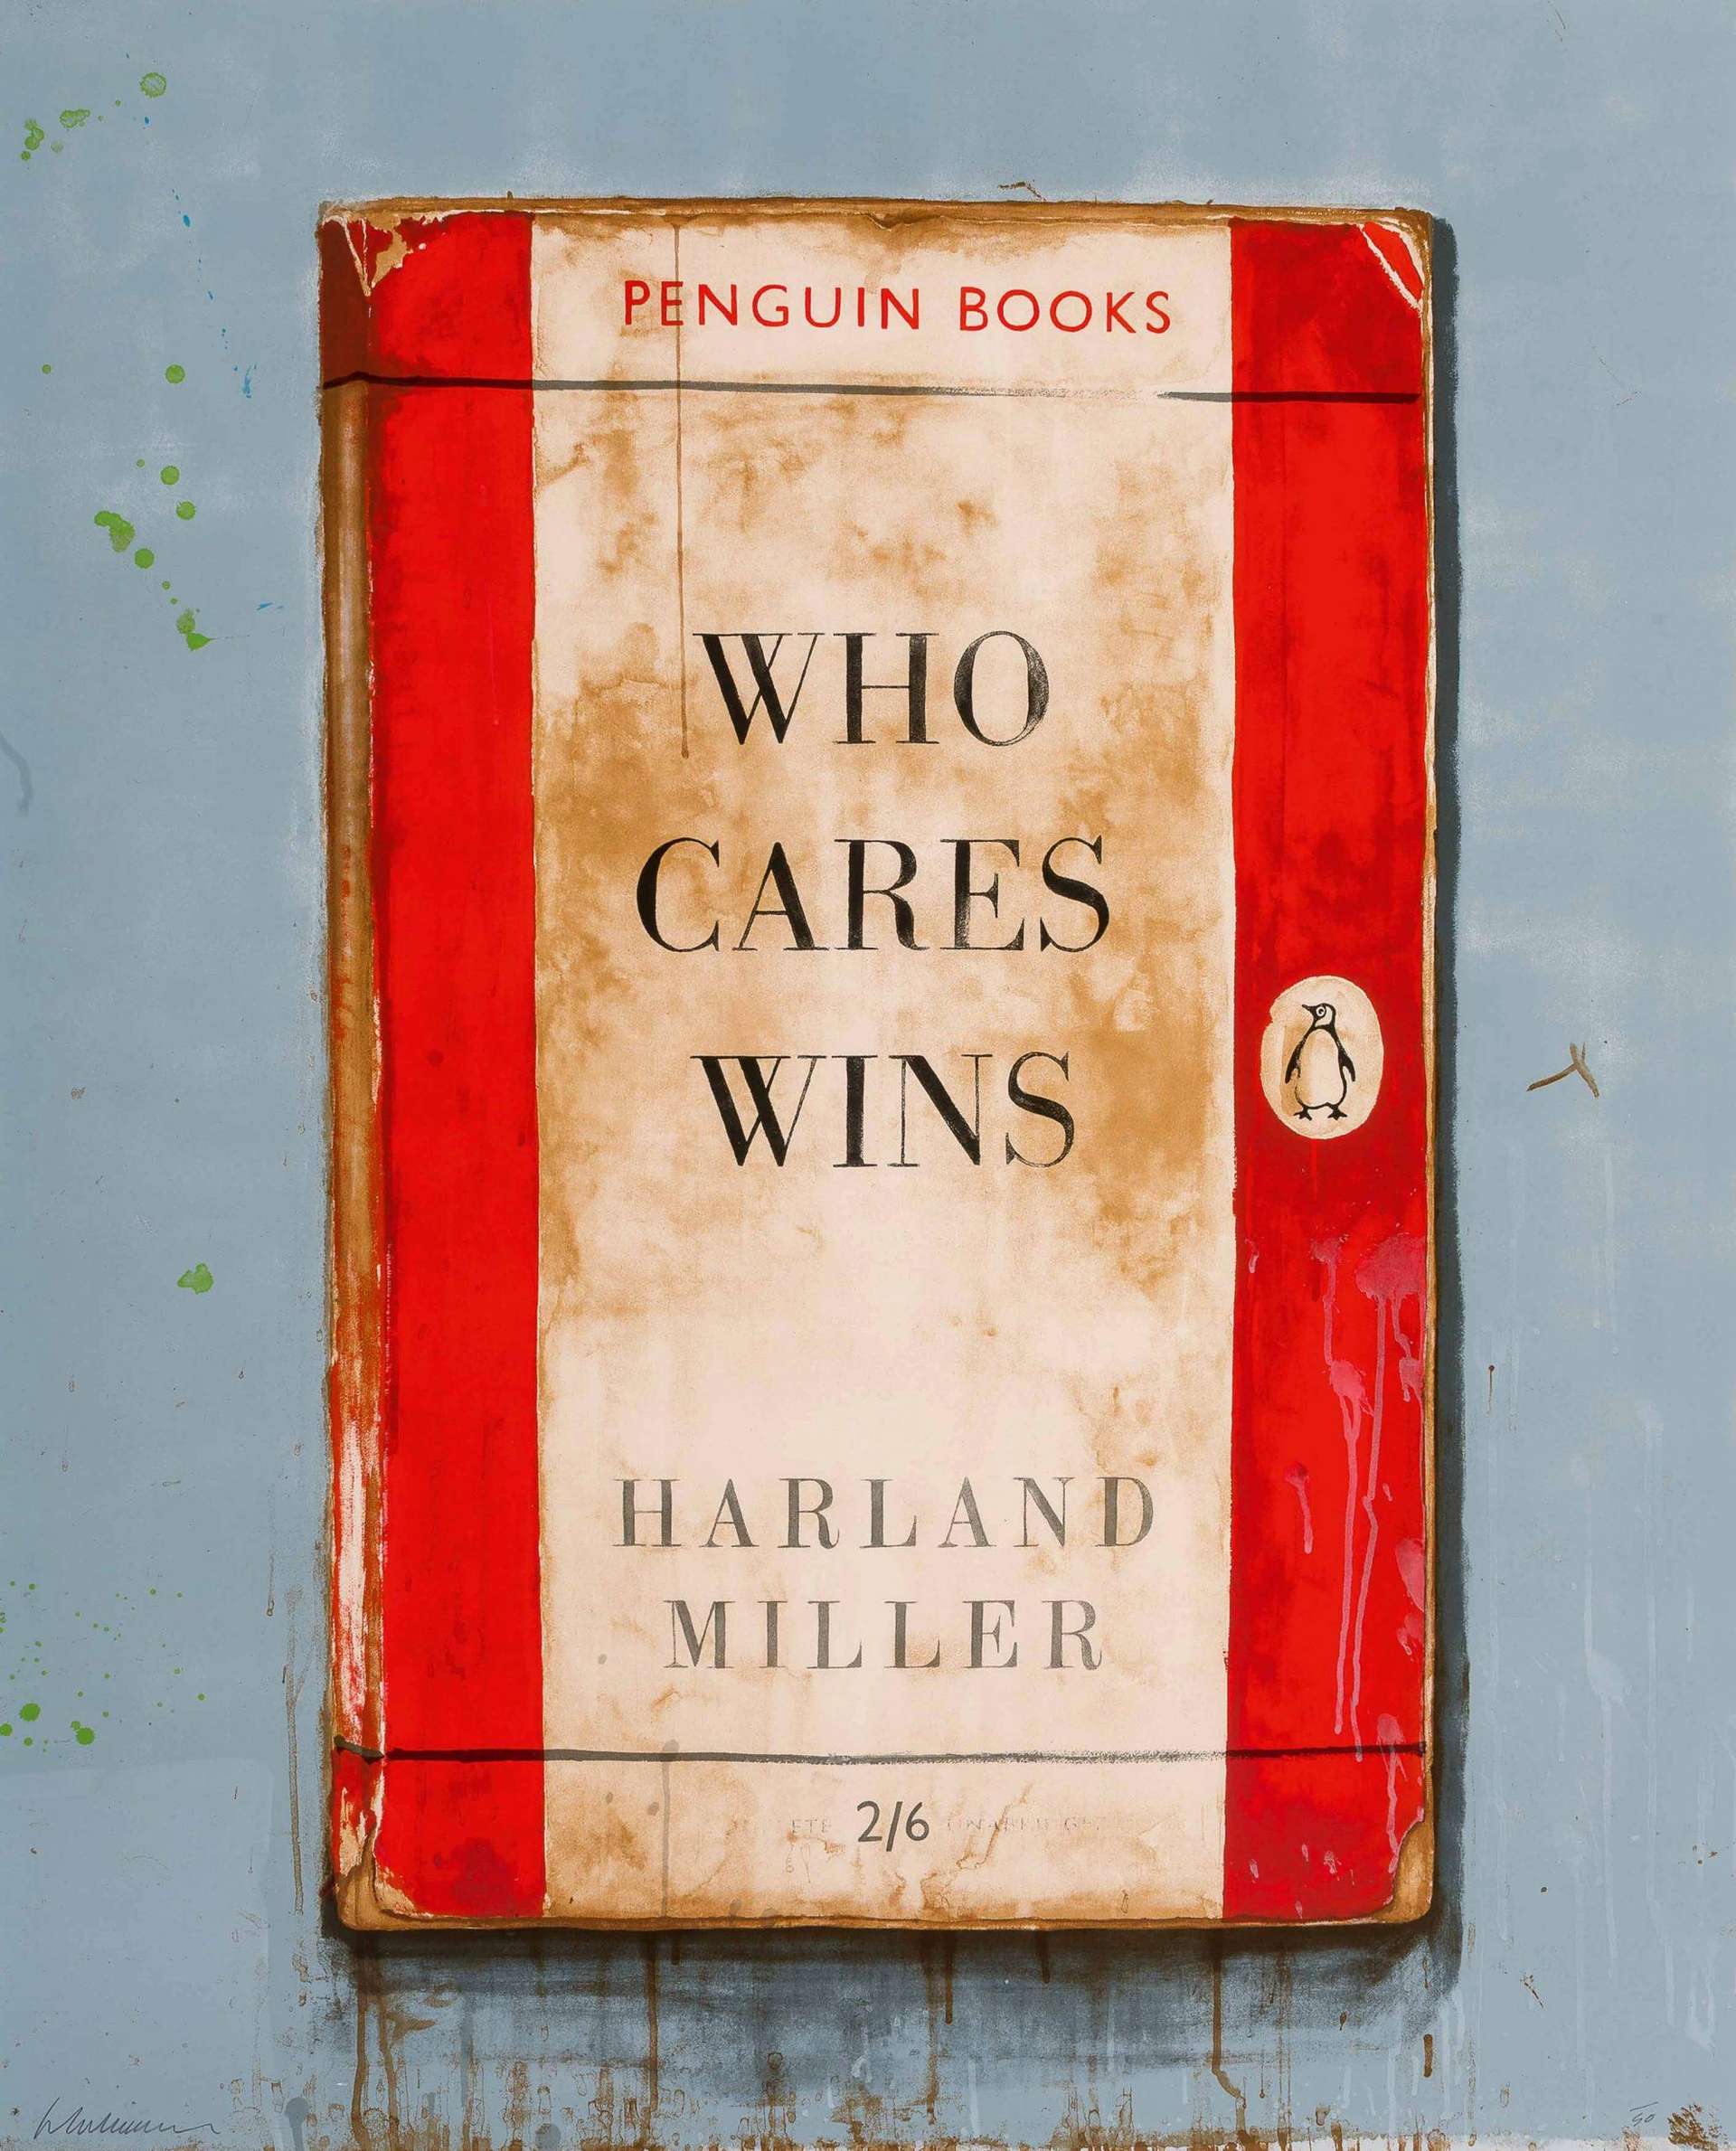 The screen print depicts a vintage Penguin book cover at the centre of the composition. Against a steel-coloured background, the red and white book appears worn, with water stains which seep from the bottom of the book into the bottom of the composition. On the book cover is the title: ‘WHO CARES WINS’, with ‘PENGUIN BOOKS’ written in the top margin, and the artist's name ‘HARLAND MILLER’ in the bottom margin.